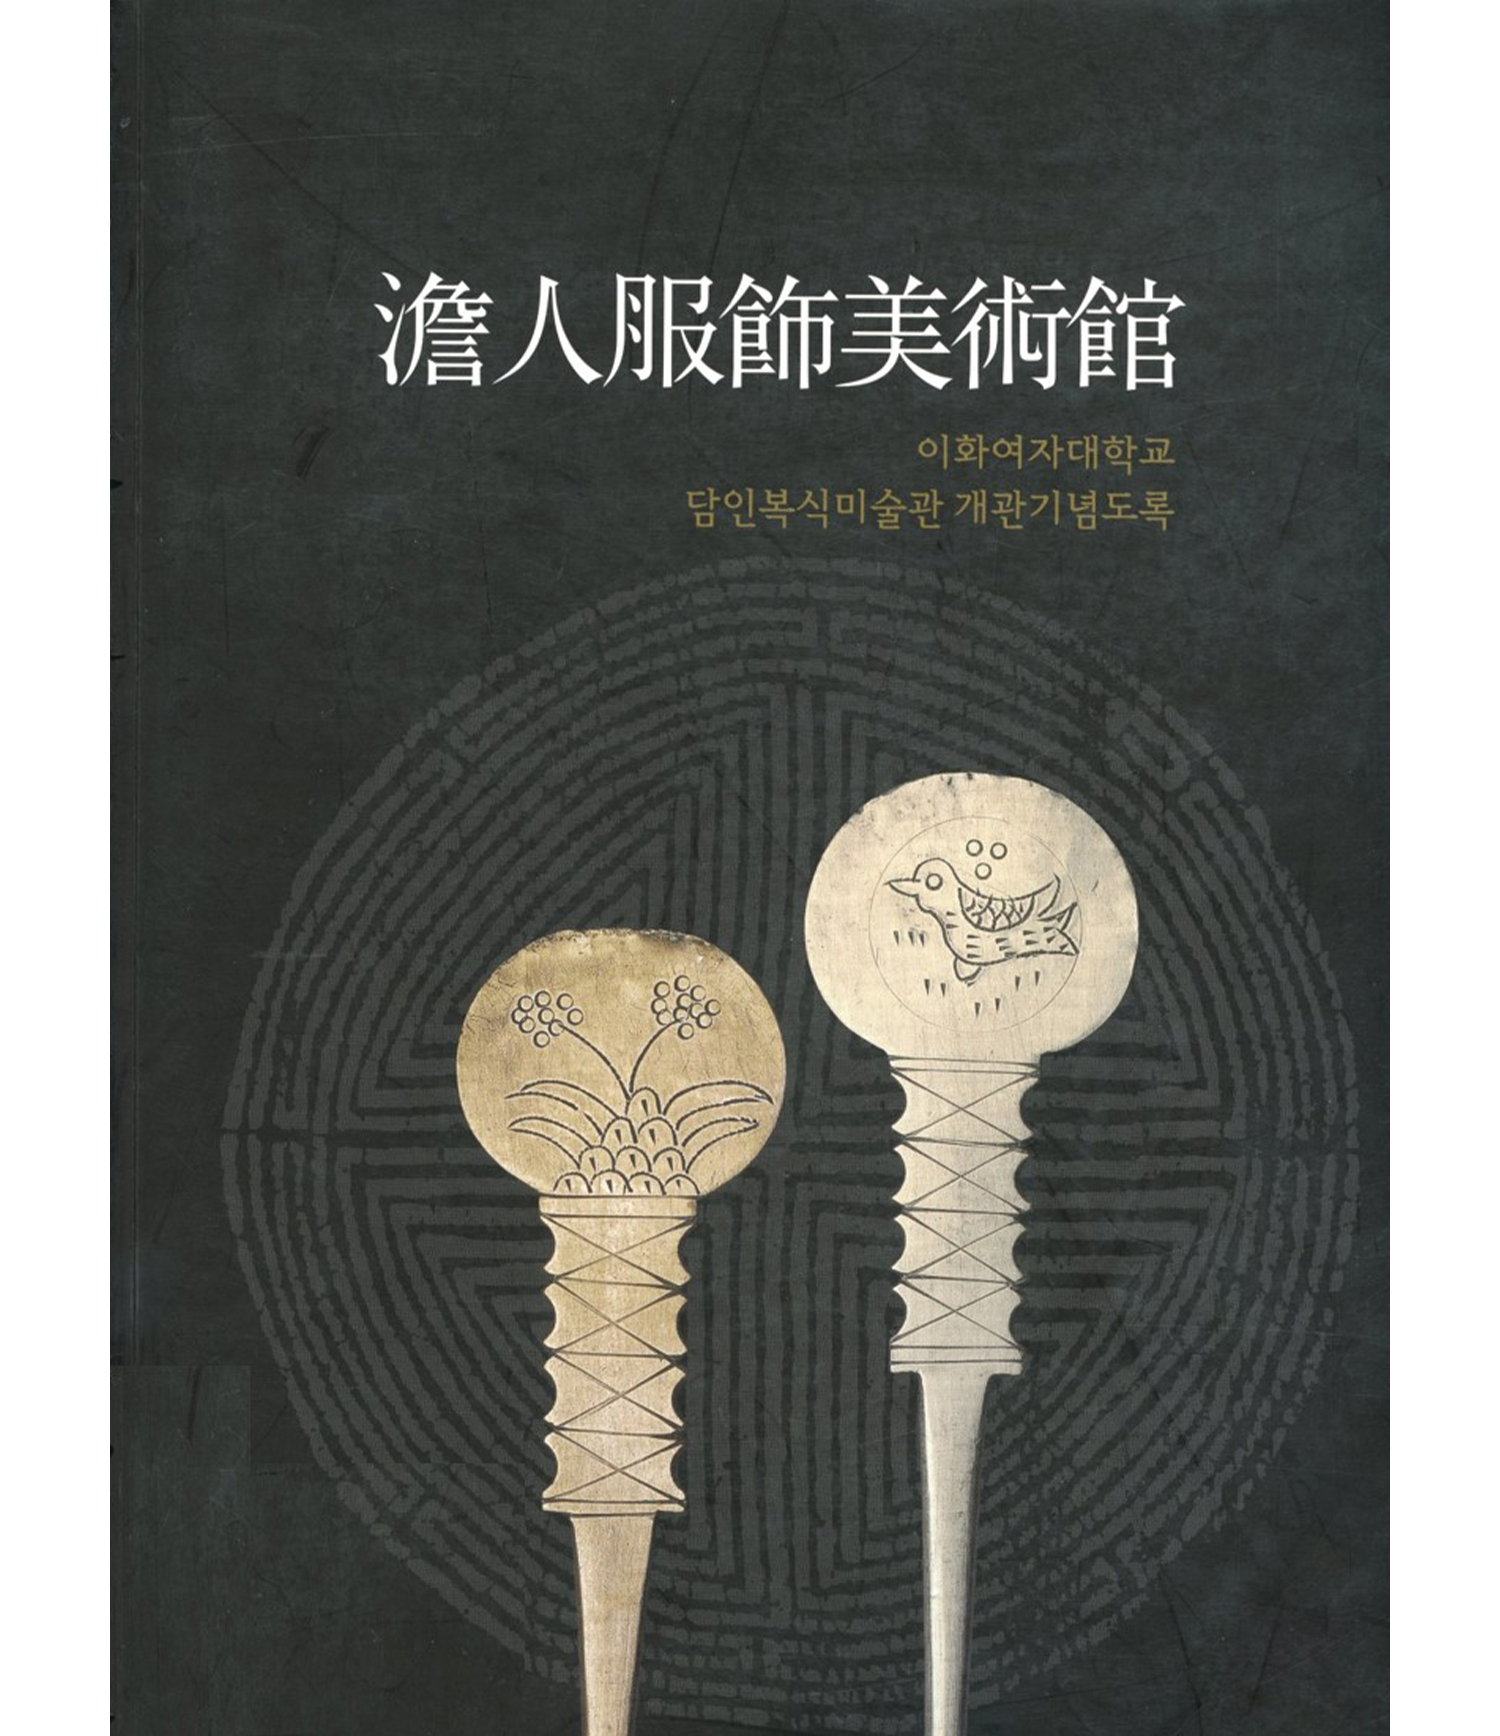 The Inaugural Exhibition Catalogue of Chang Pudeok Memorial Gallery